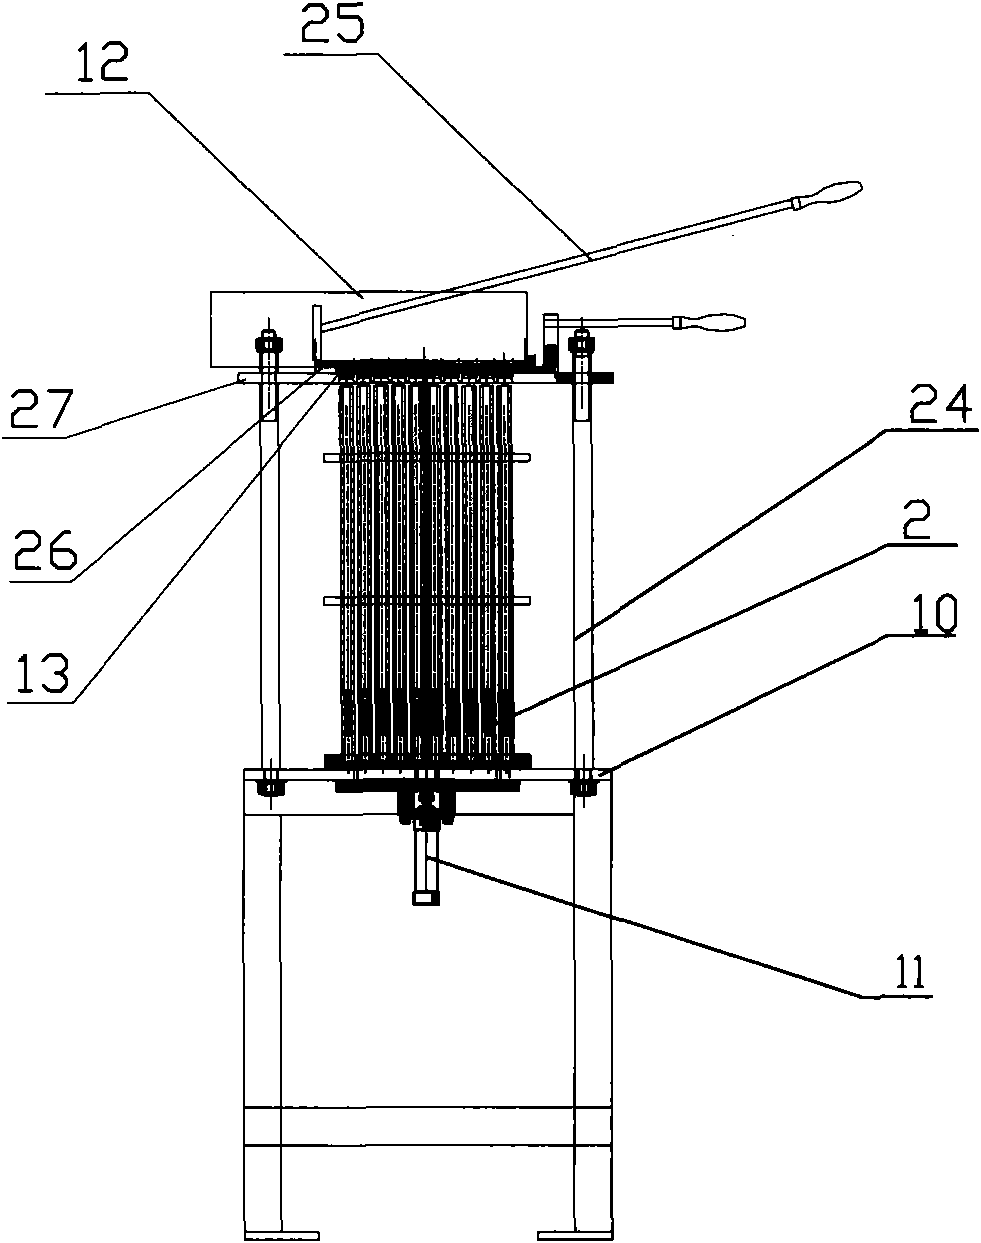 Method for automatically assembling and producing fireworks